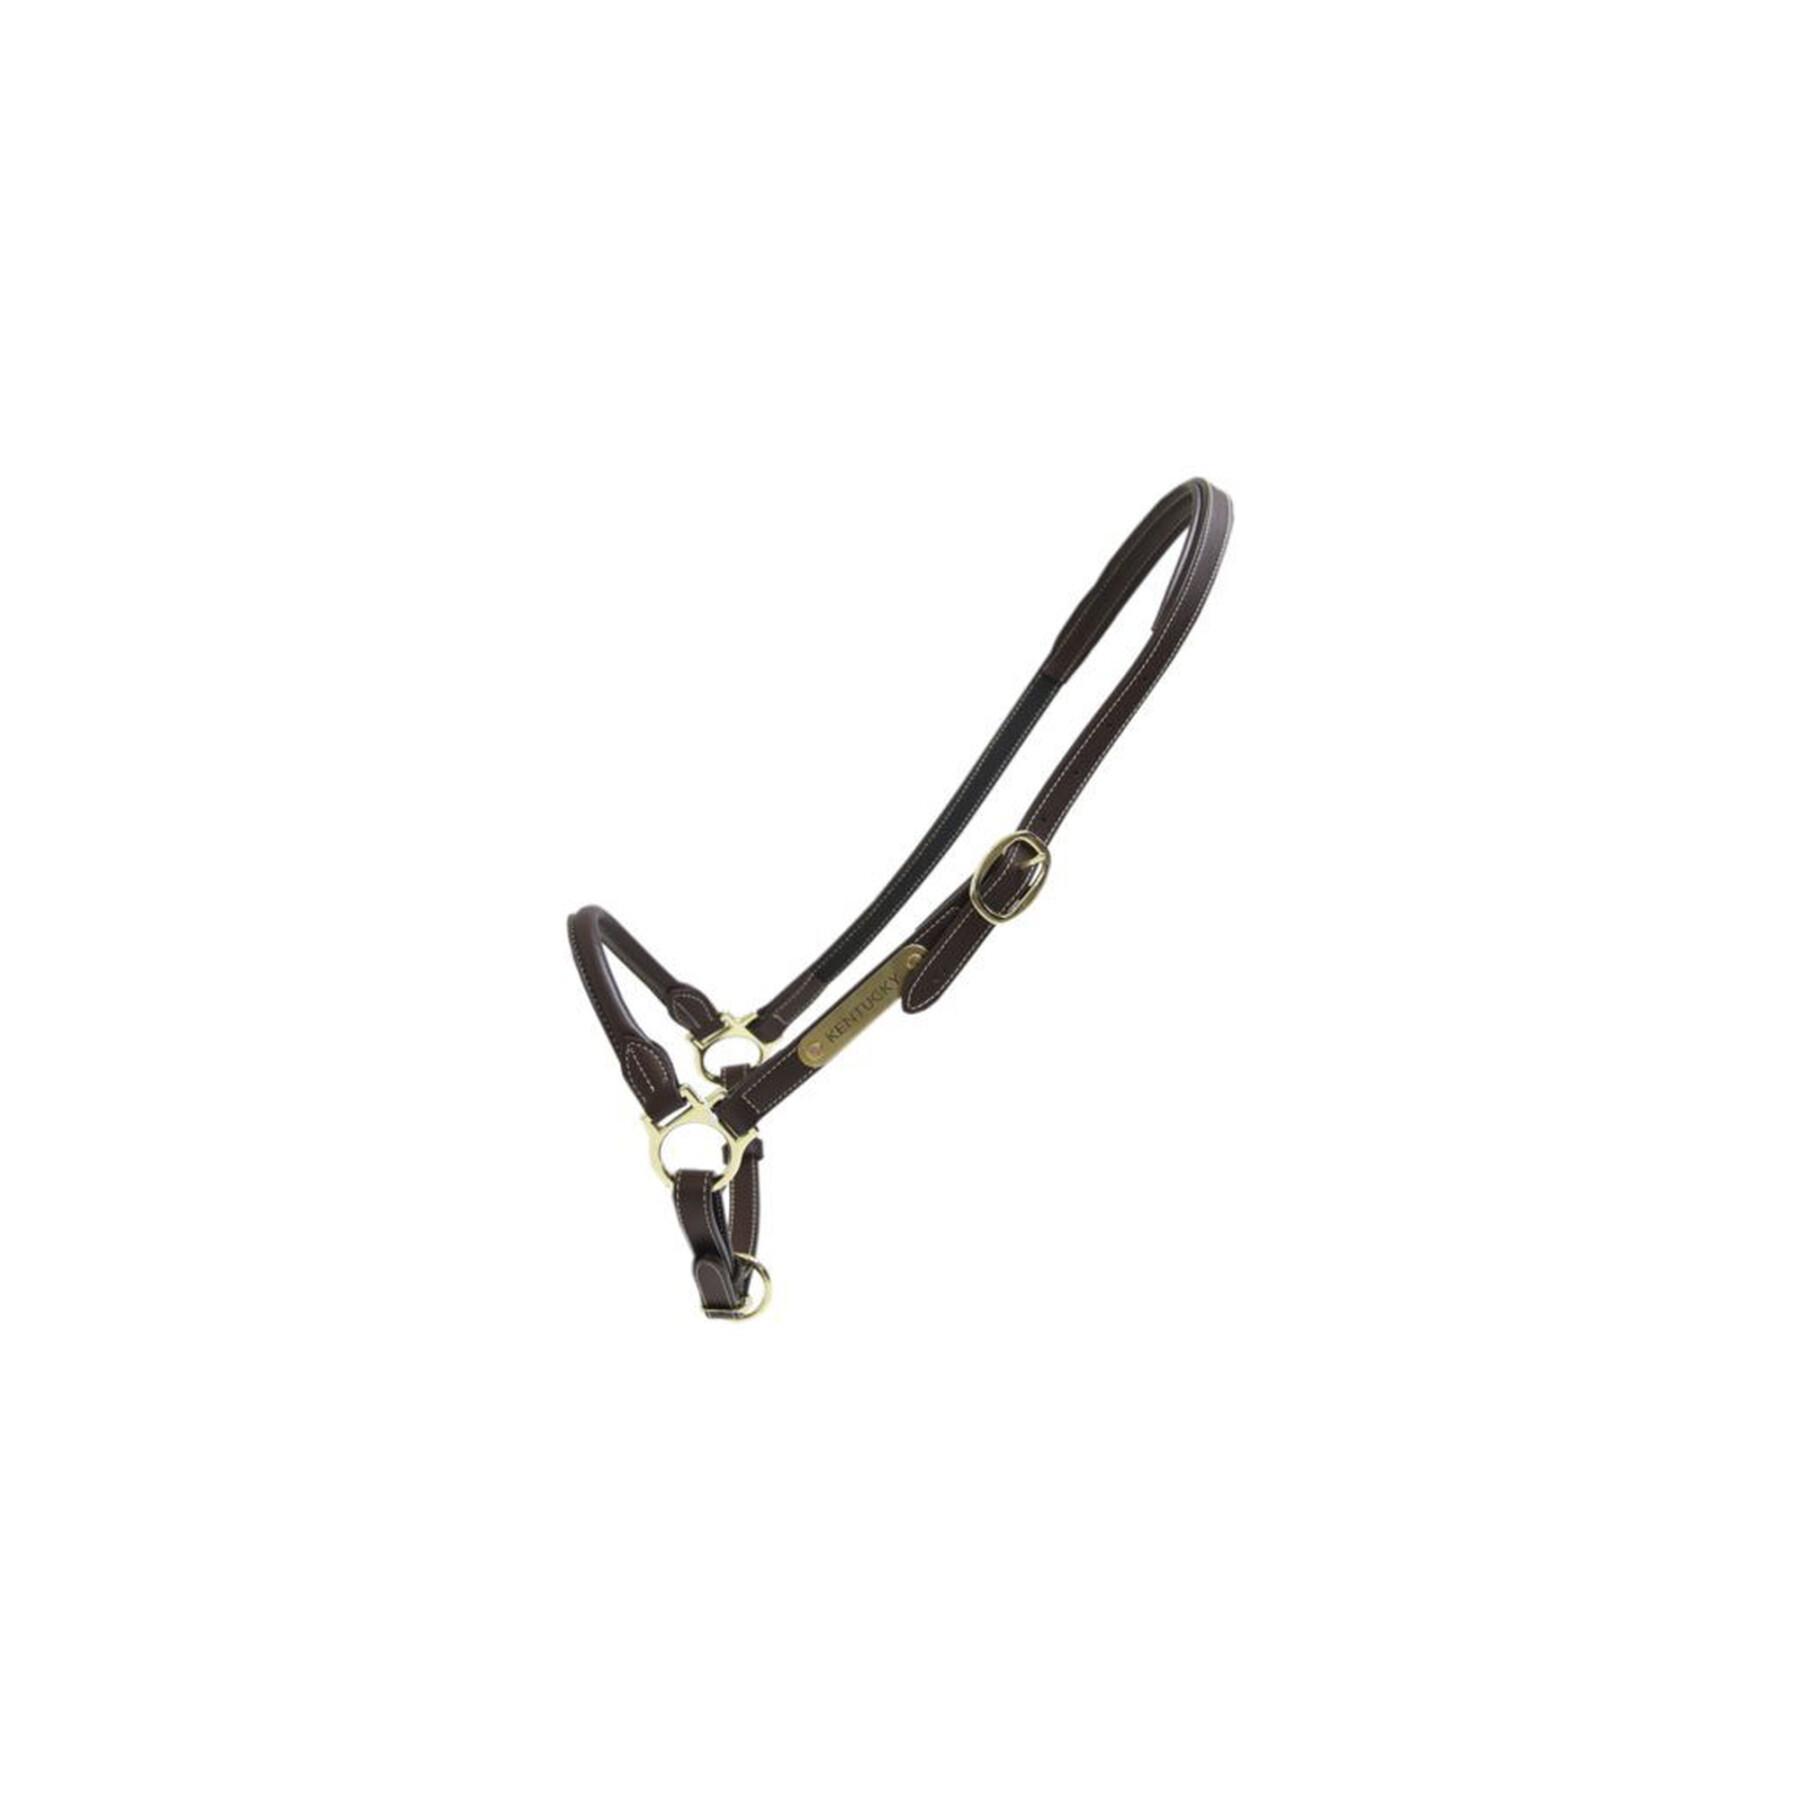 Leather halter for grooming horses Kentucky